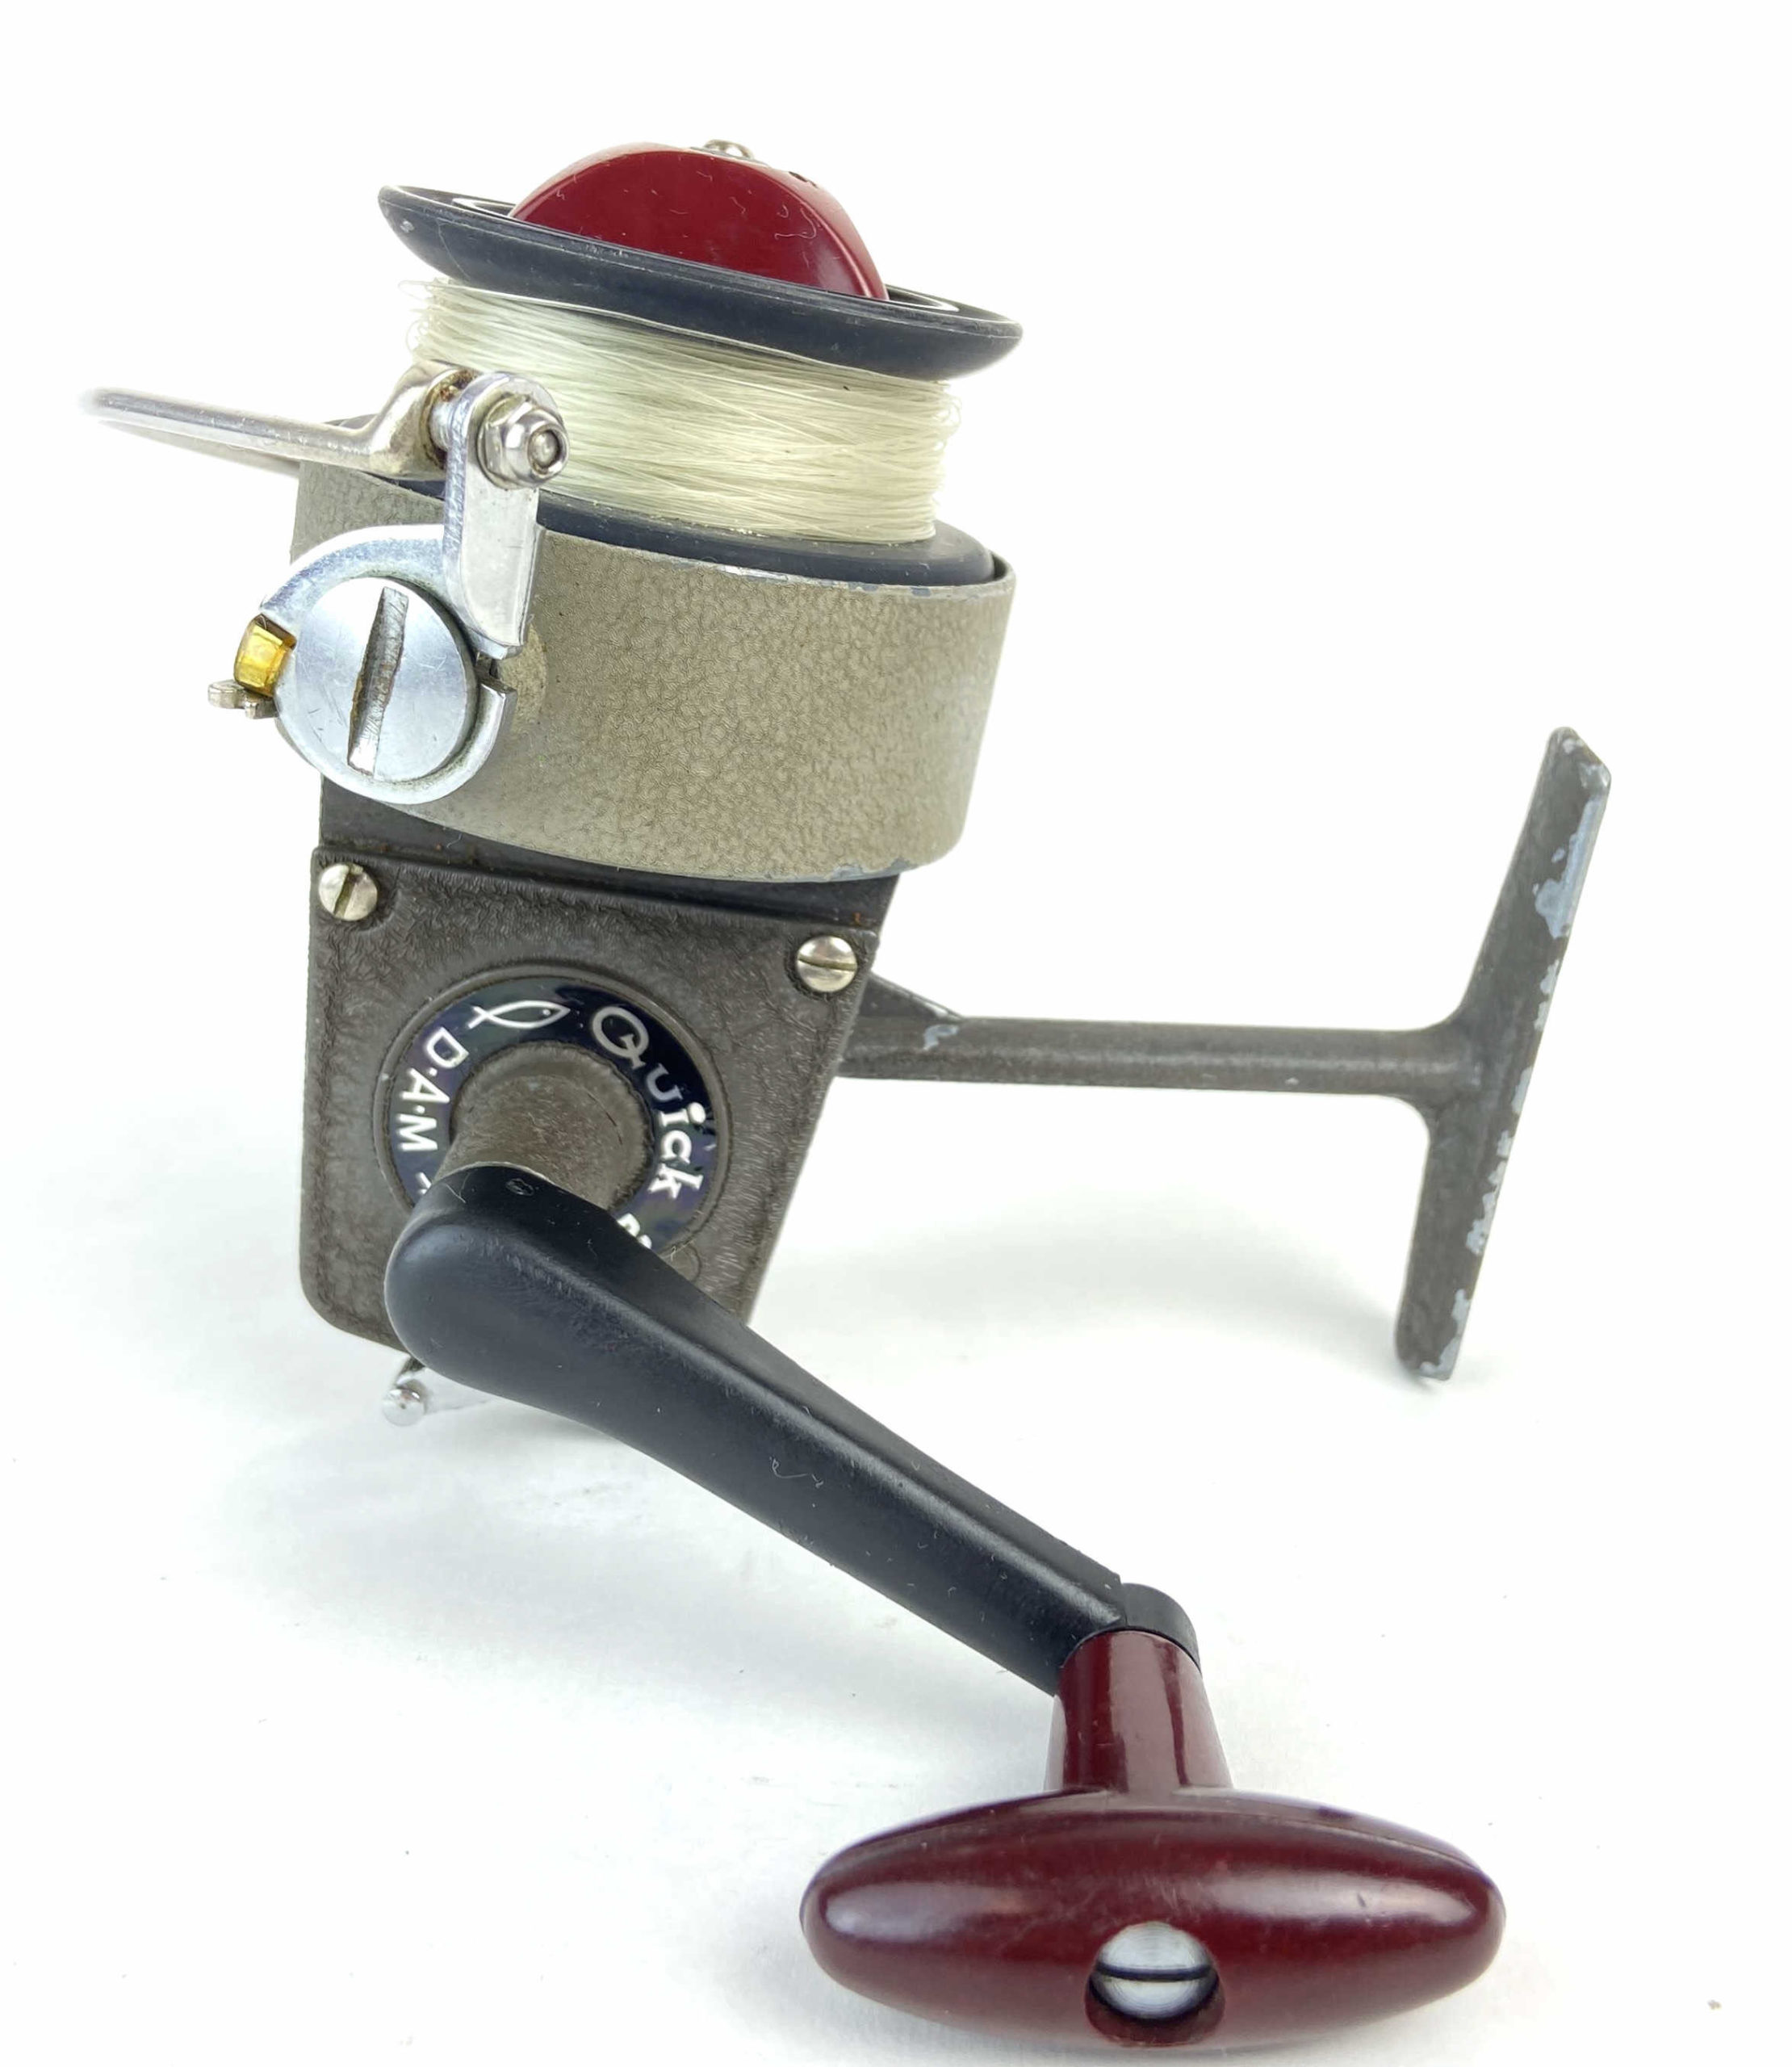 Super tuned and upgraded vintage DAM Quick 330N bailess reel